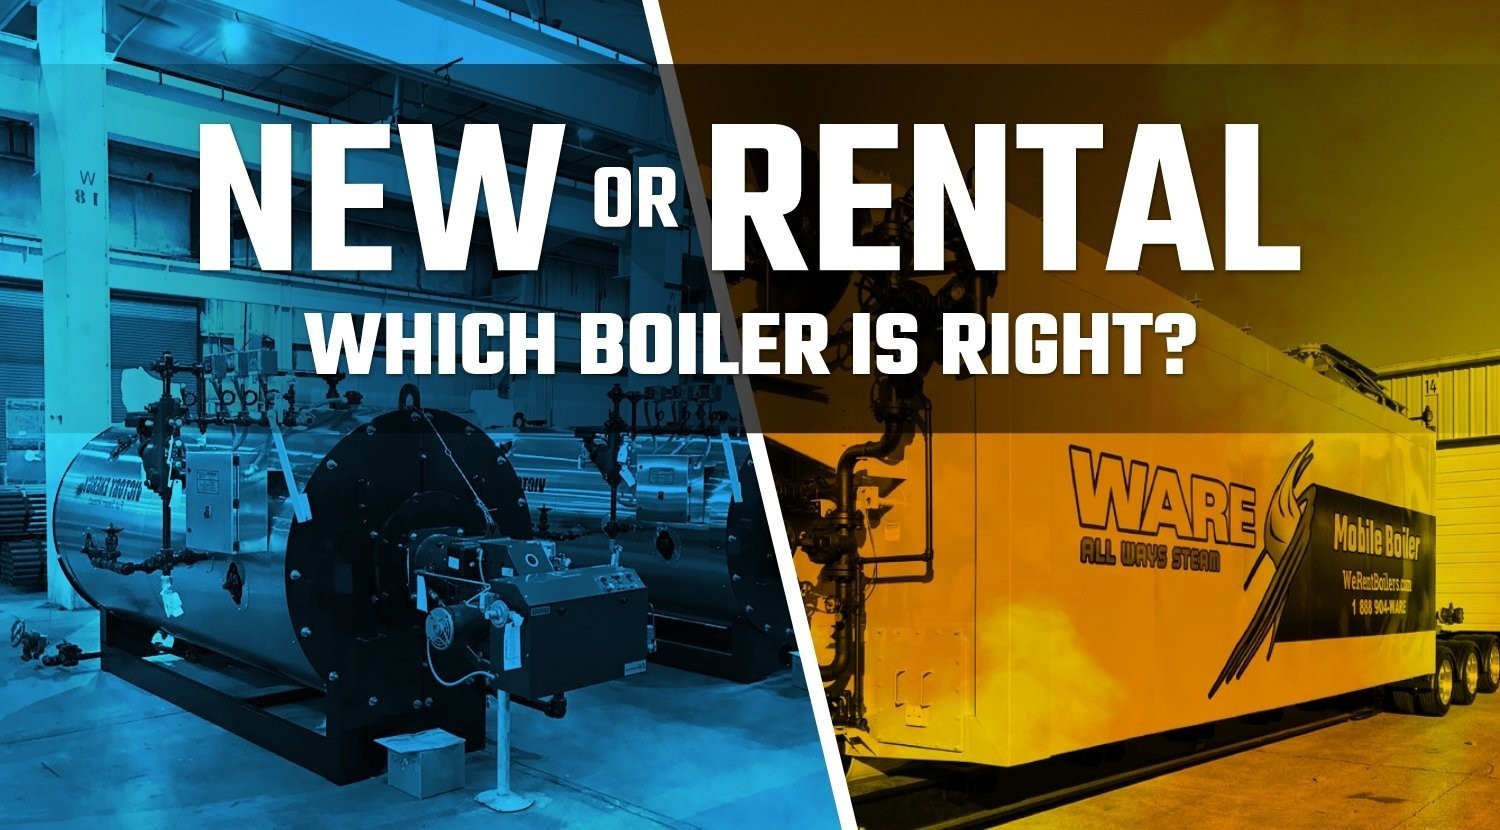 New or Rental: Which Boiler is Right?